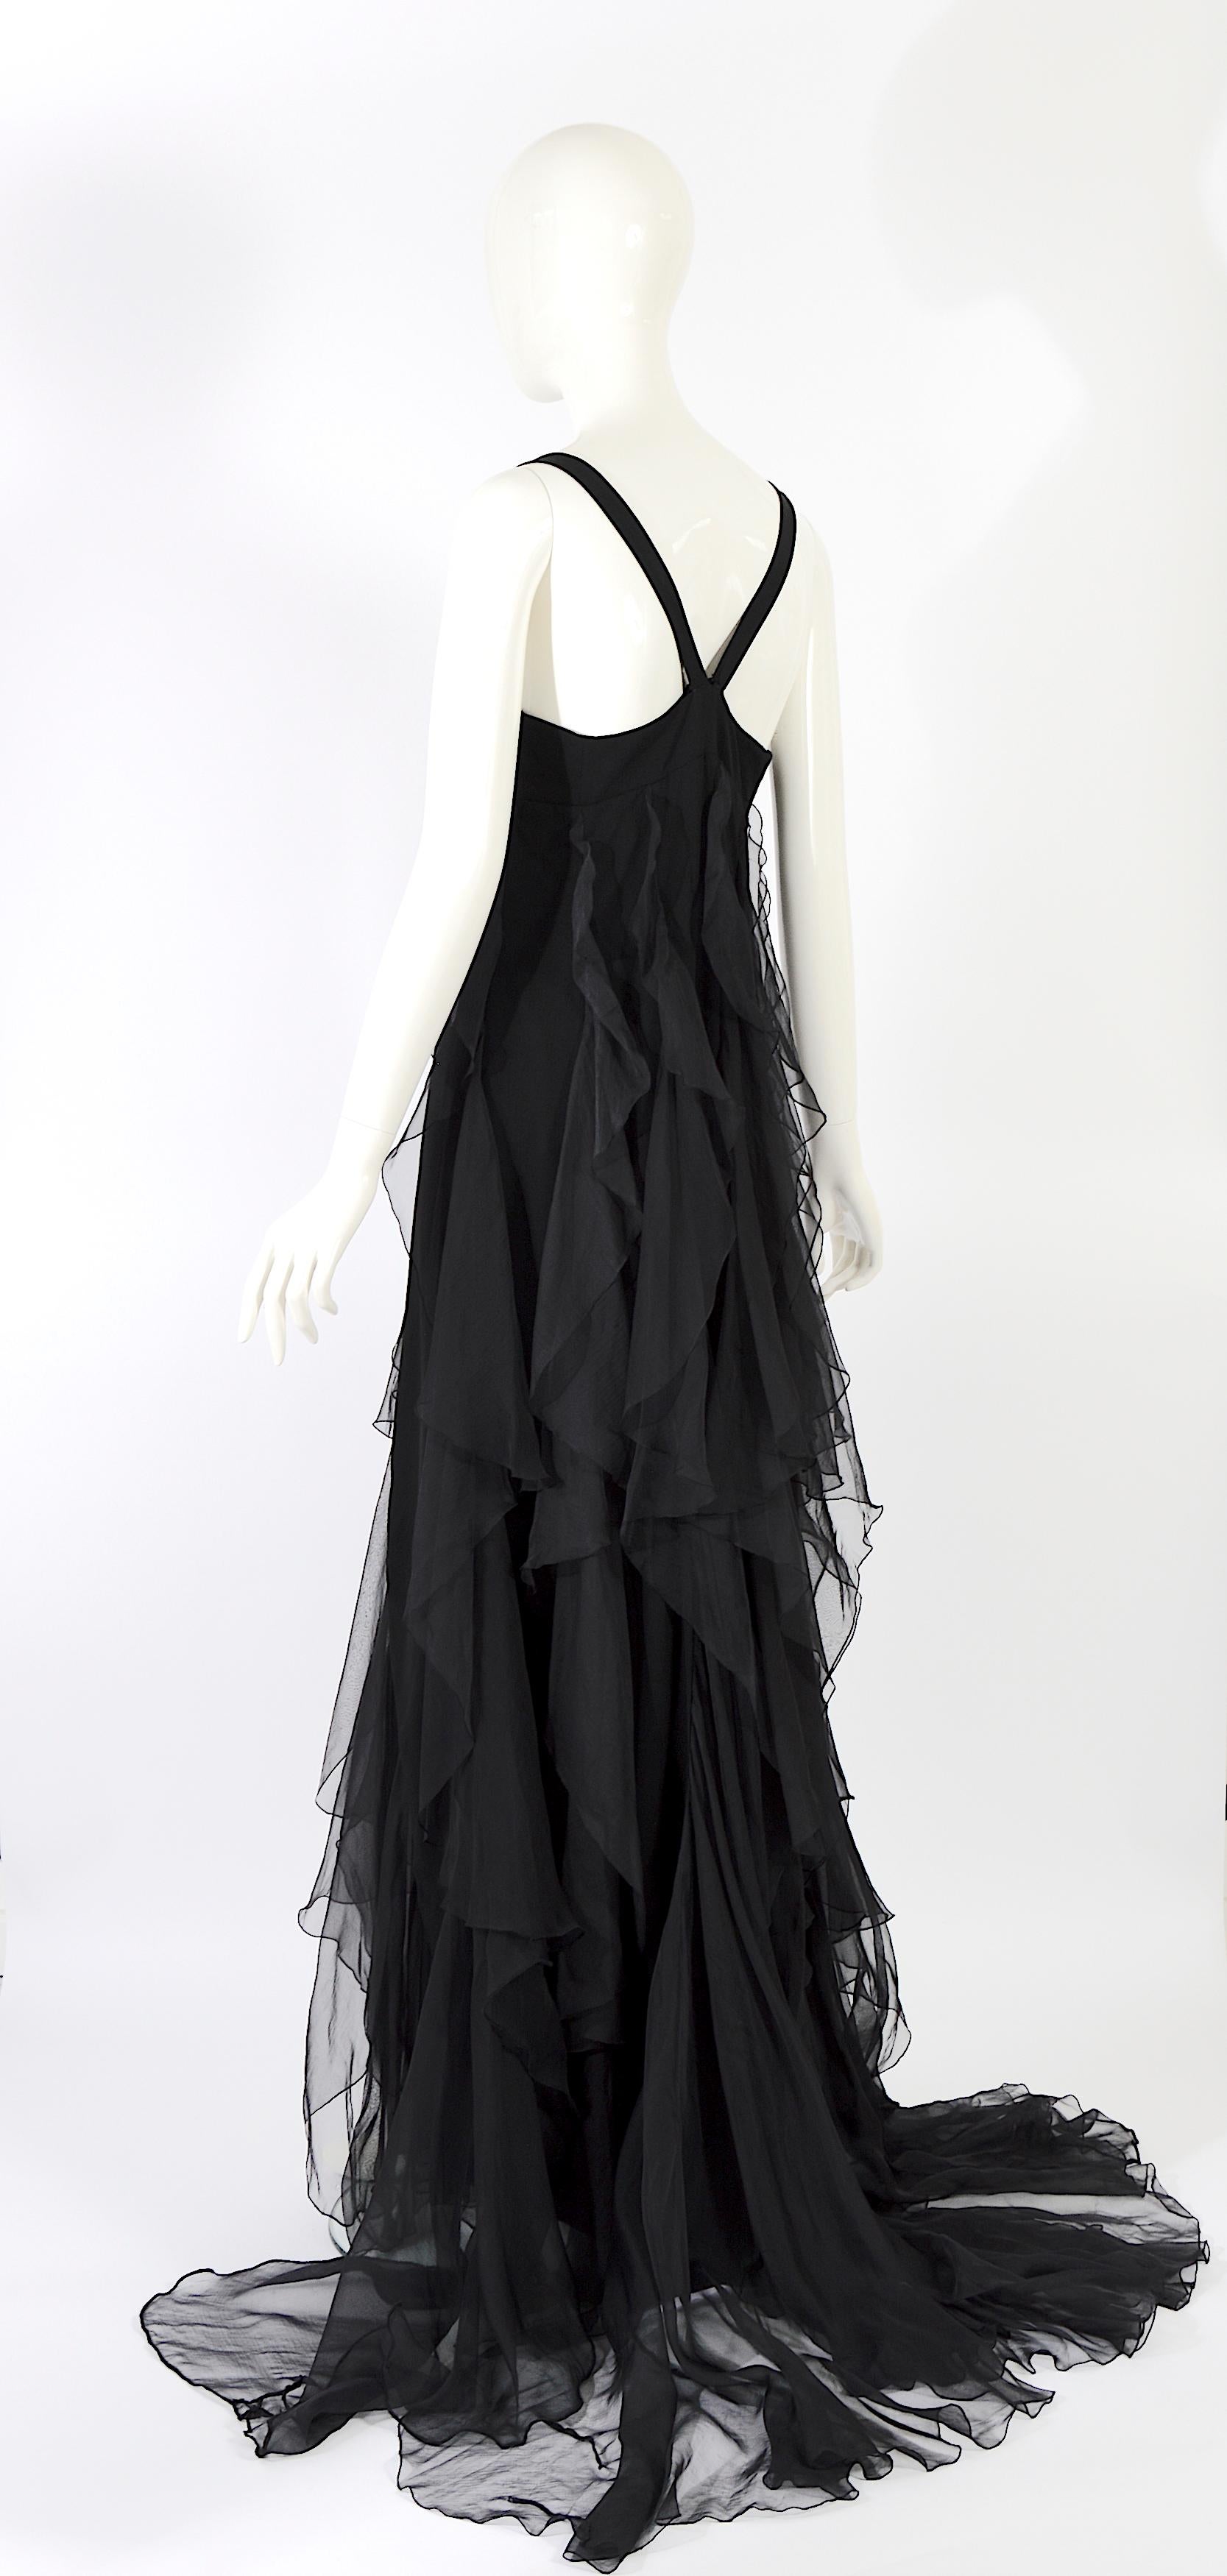 Christian Dior by Gianfranco Ferre S/S 1994 vintage black silk evening dress For Sale 1